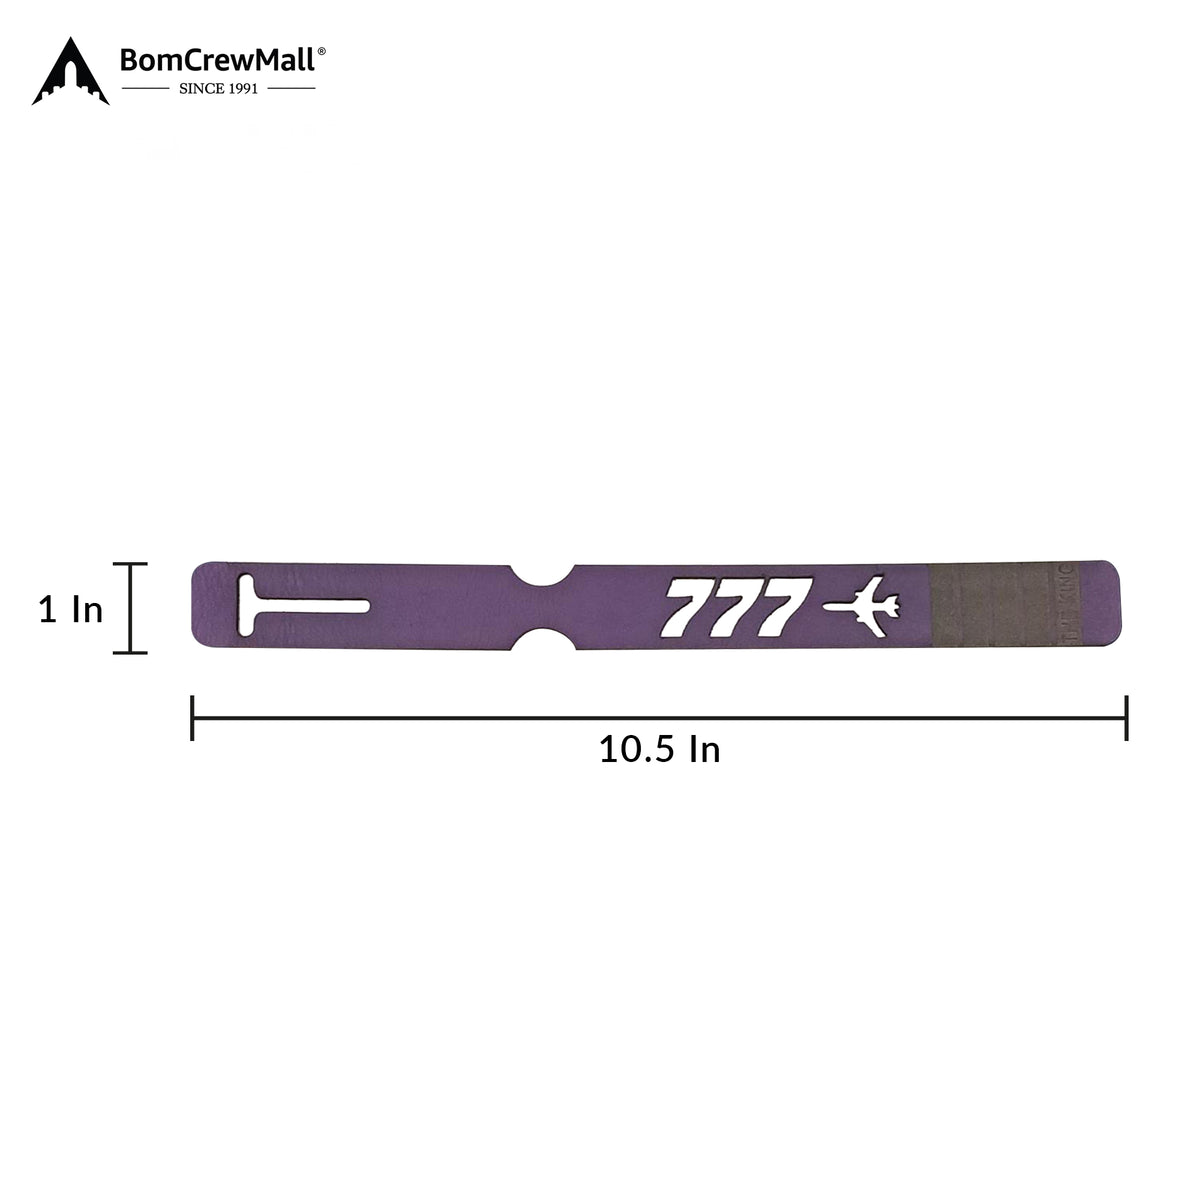 purple LASER-CUT CREW 747-8 BAG TAG with dimensions